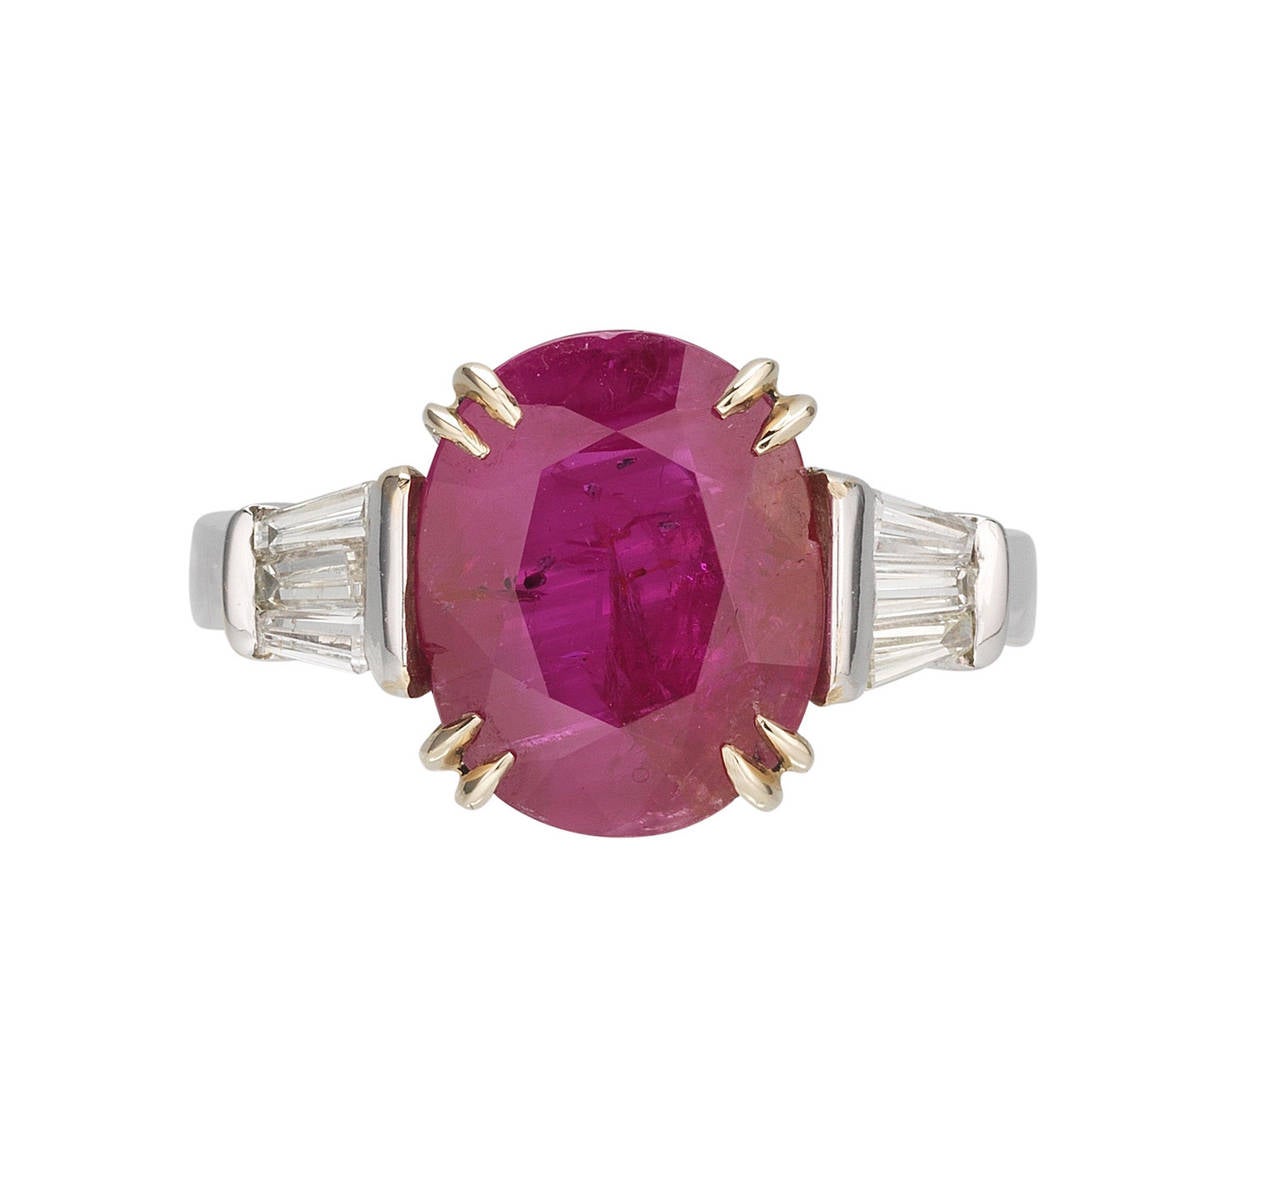 A 5.71 carats Burma ruby non treated mounted on solitaire white gold ring. French marks, modern work.
Accompanied by a SSEF Certificate.